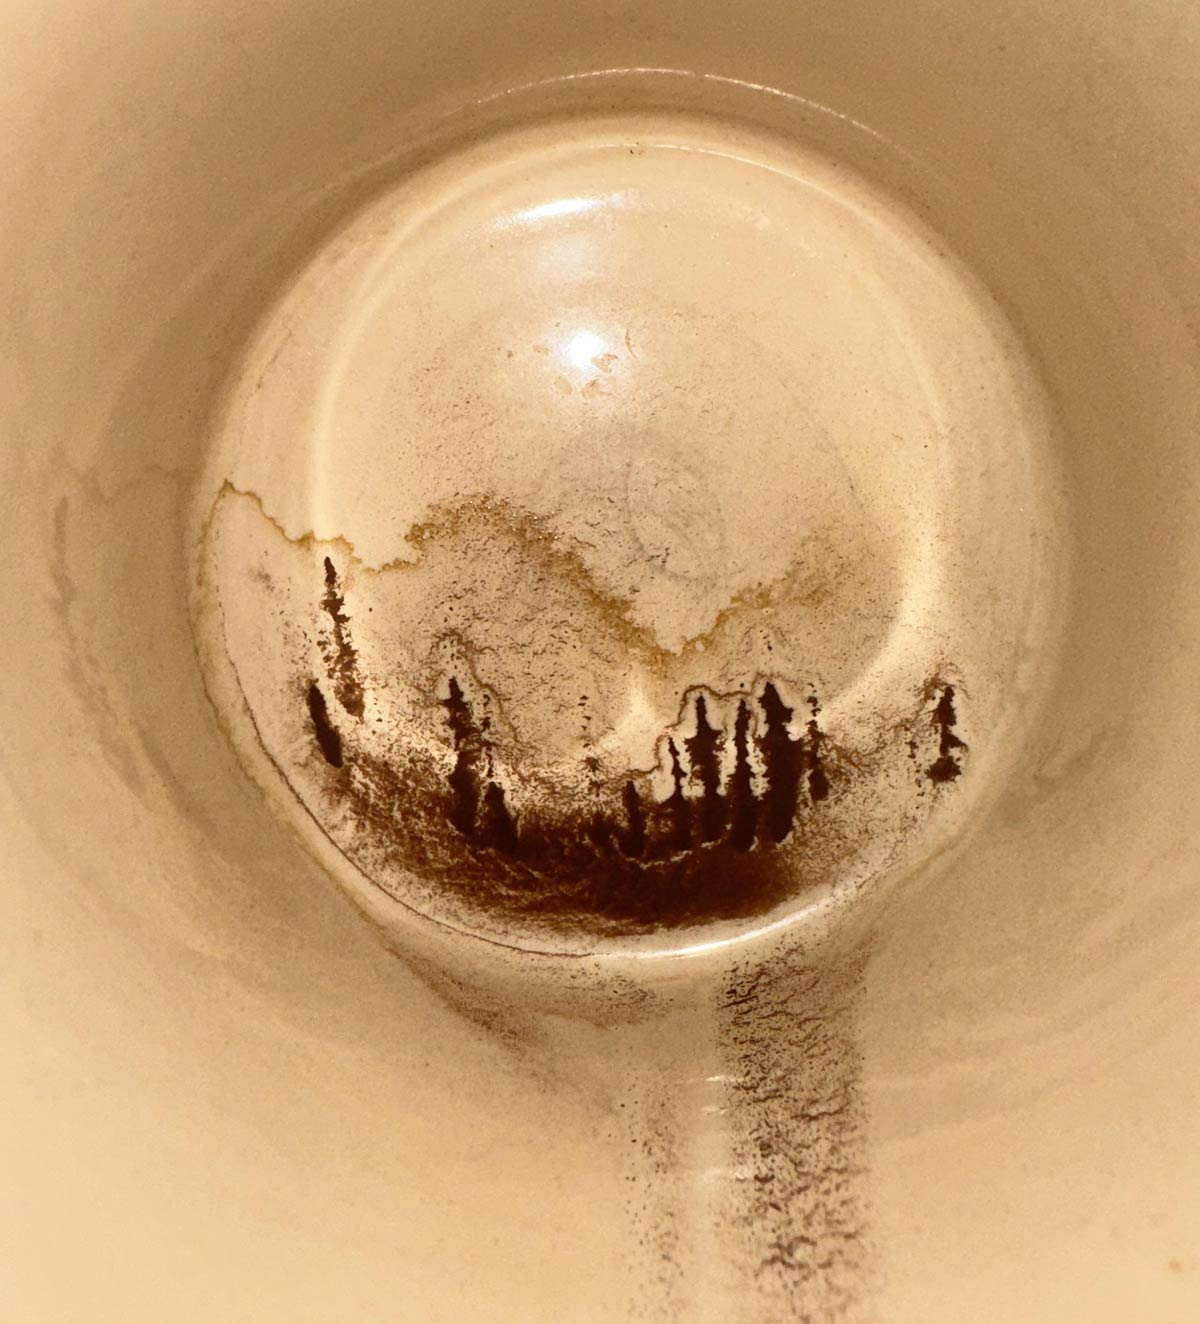 Little forest scene at bottom of my coffee today